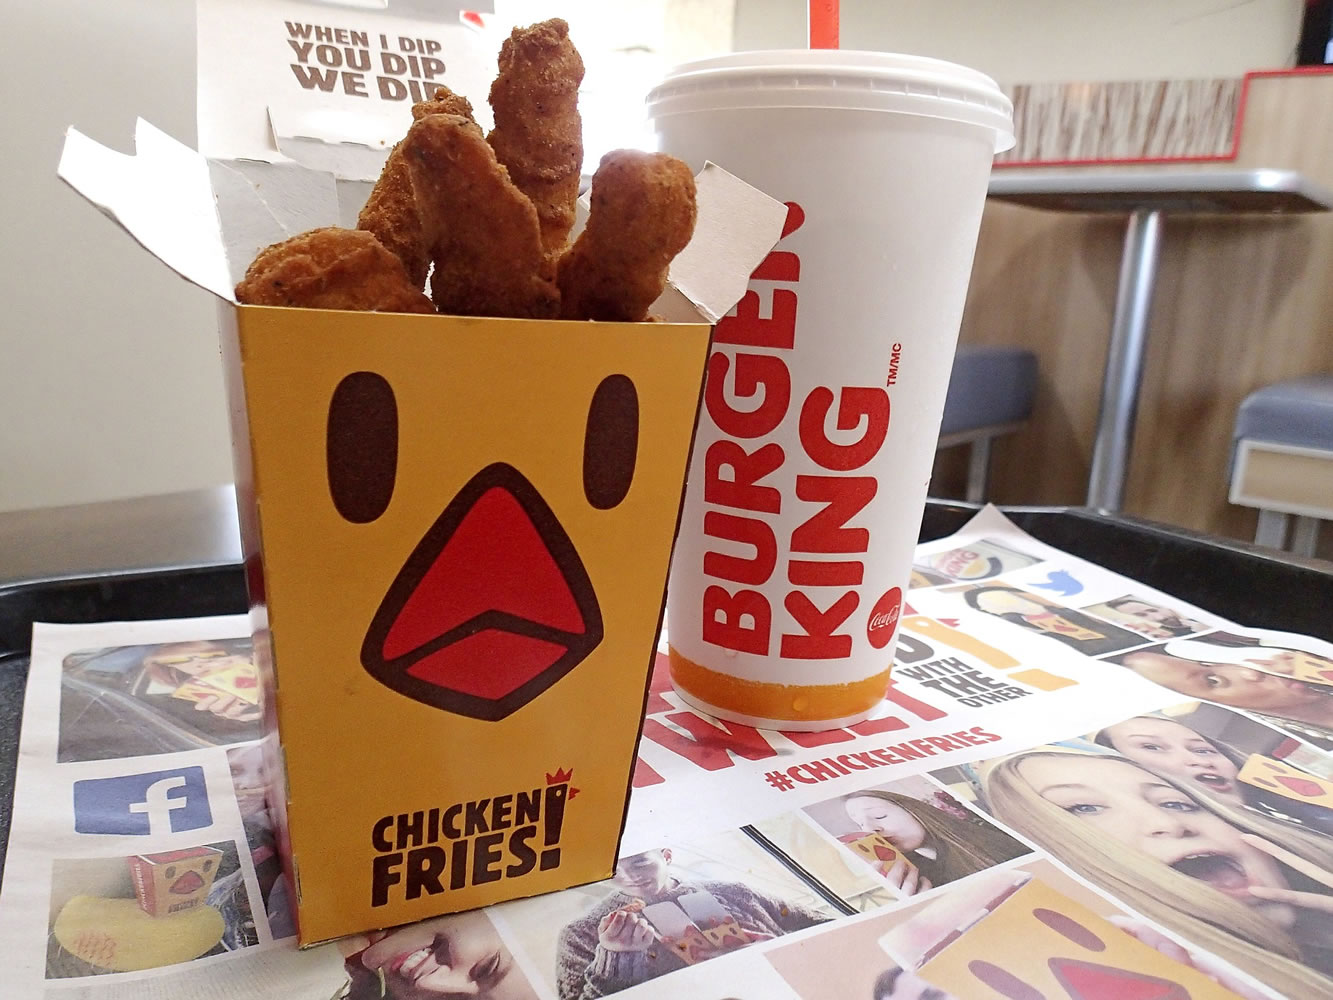 Chicken fries and a soft drink are posed for a photo at a Burger King restaurant